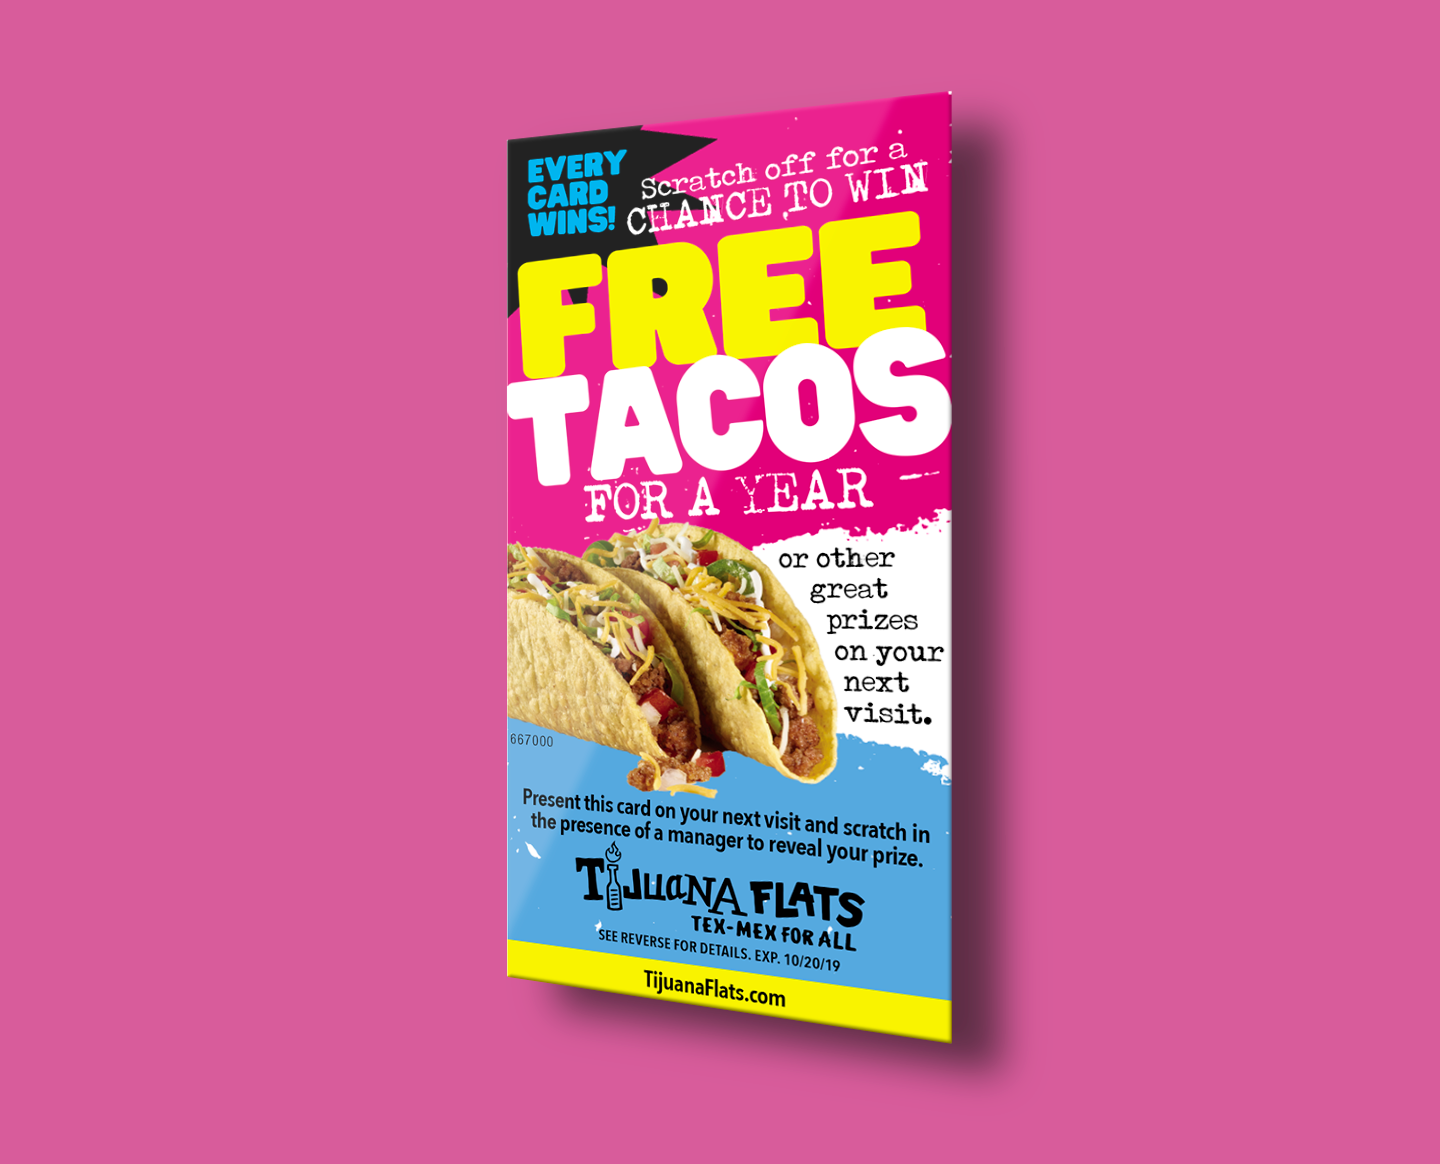 Image showing scratcher from Tijuana Flats promoting discounts